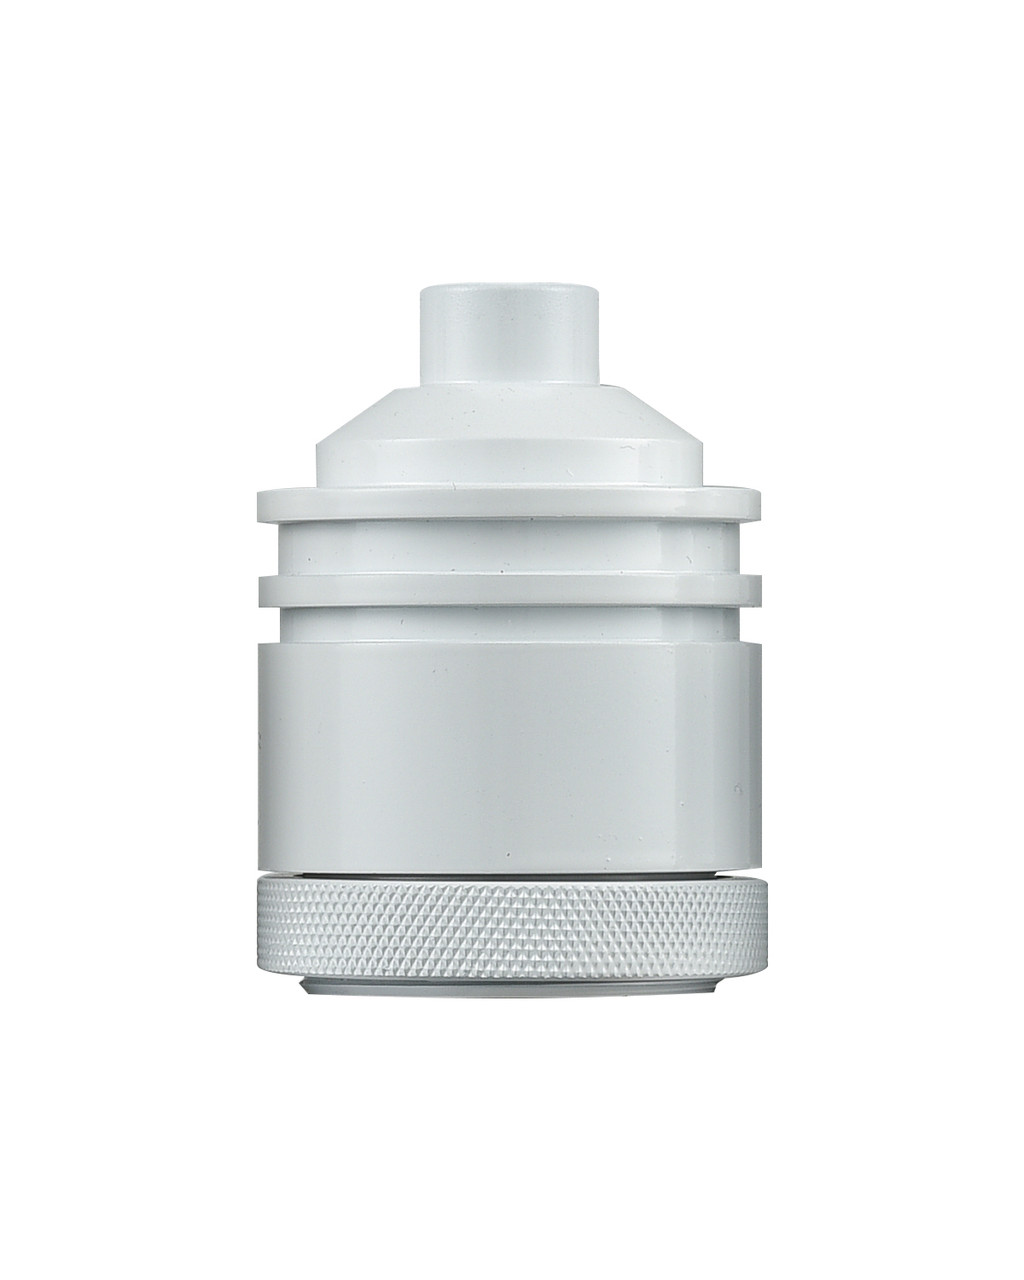 INNOVATIONS 002-W Winchester 2 inch Socket Cover White